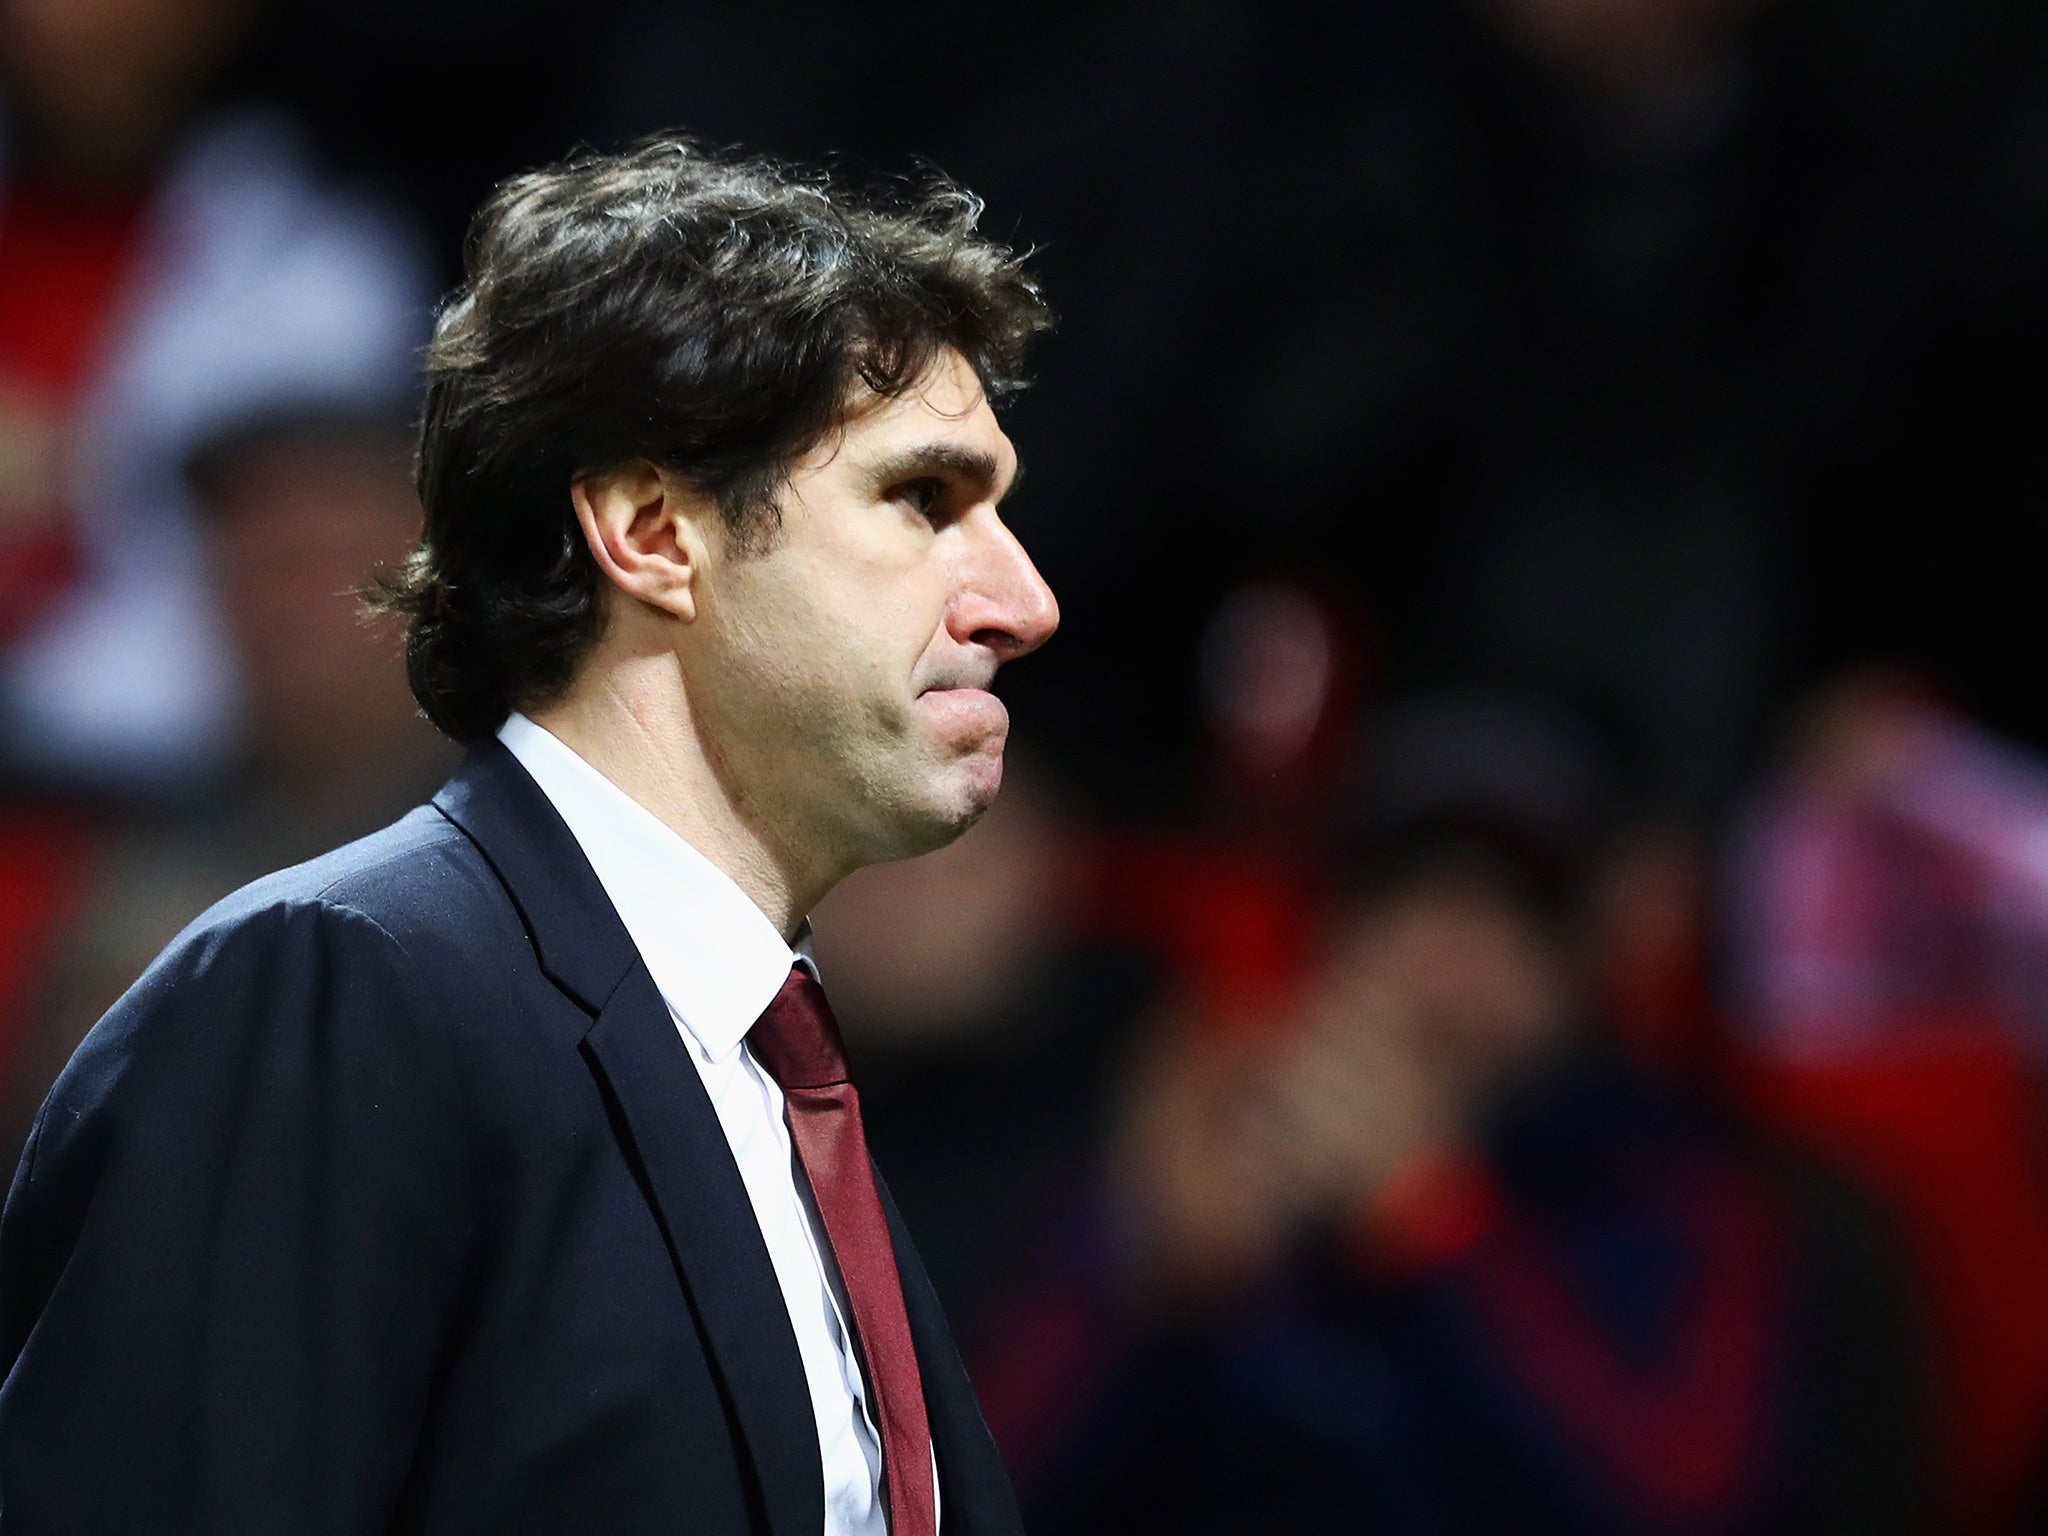 The odds of Aitor Karanka becoming the next Premier League manager to lose his job tumbled earlier this week